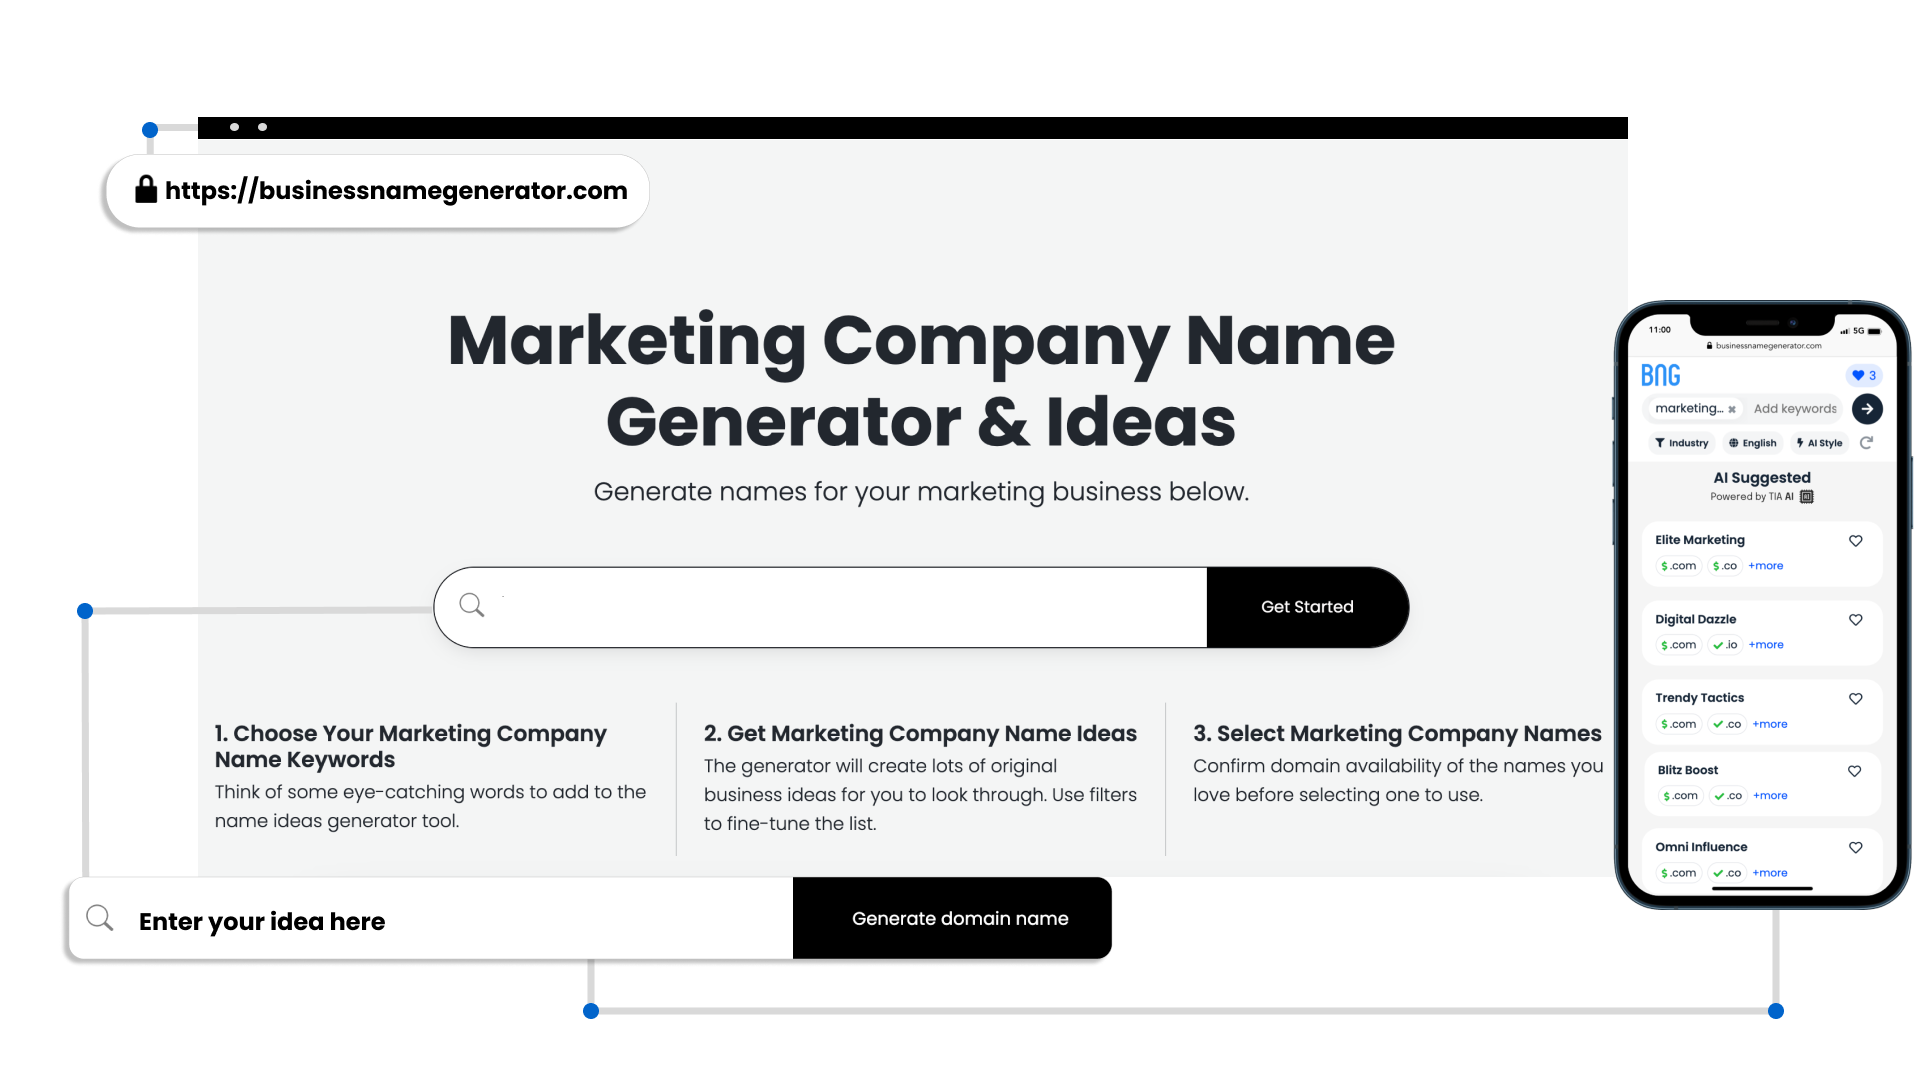 Benefits of Our Marketing Company Name Generator